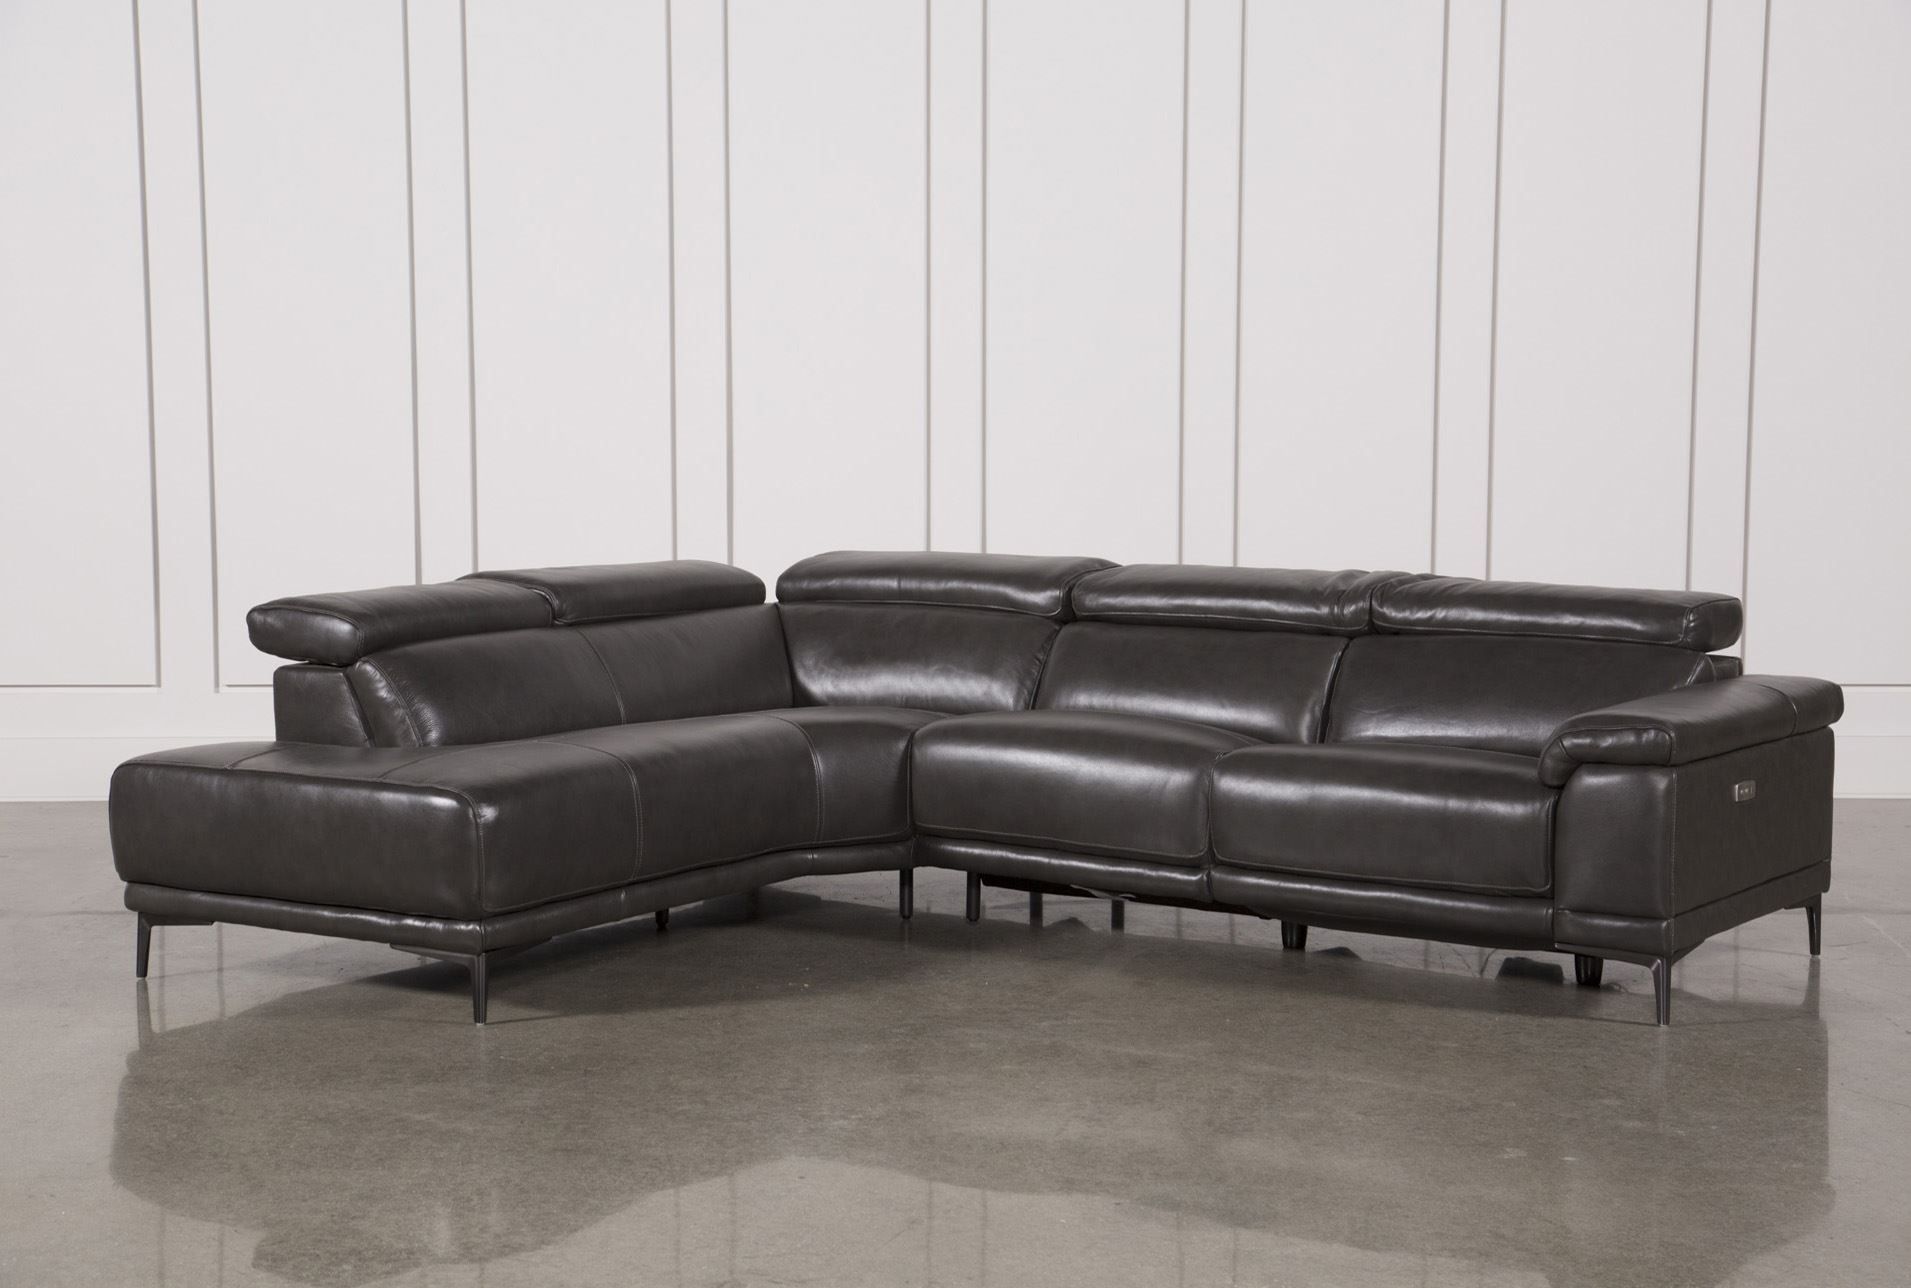 Tatum Dark Grey 2 Piece Sectional W/laf Chaise | Living Room For Turdur 3 Piece Sectionals With Laf Loveseat (View 5 of 30)